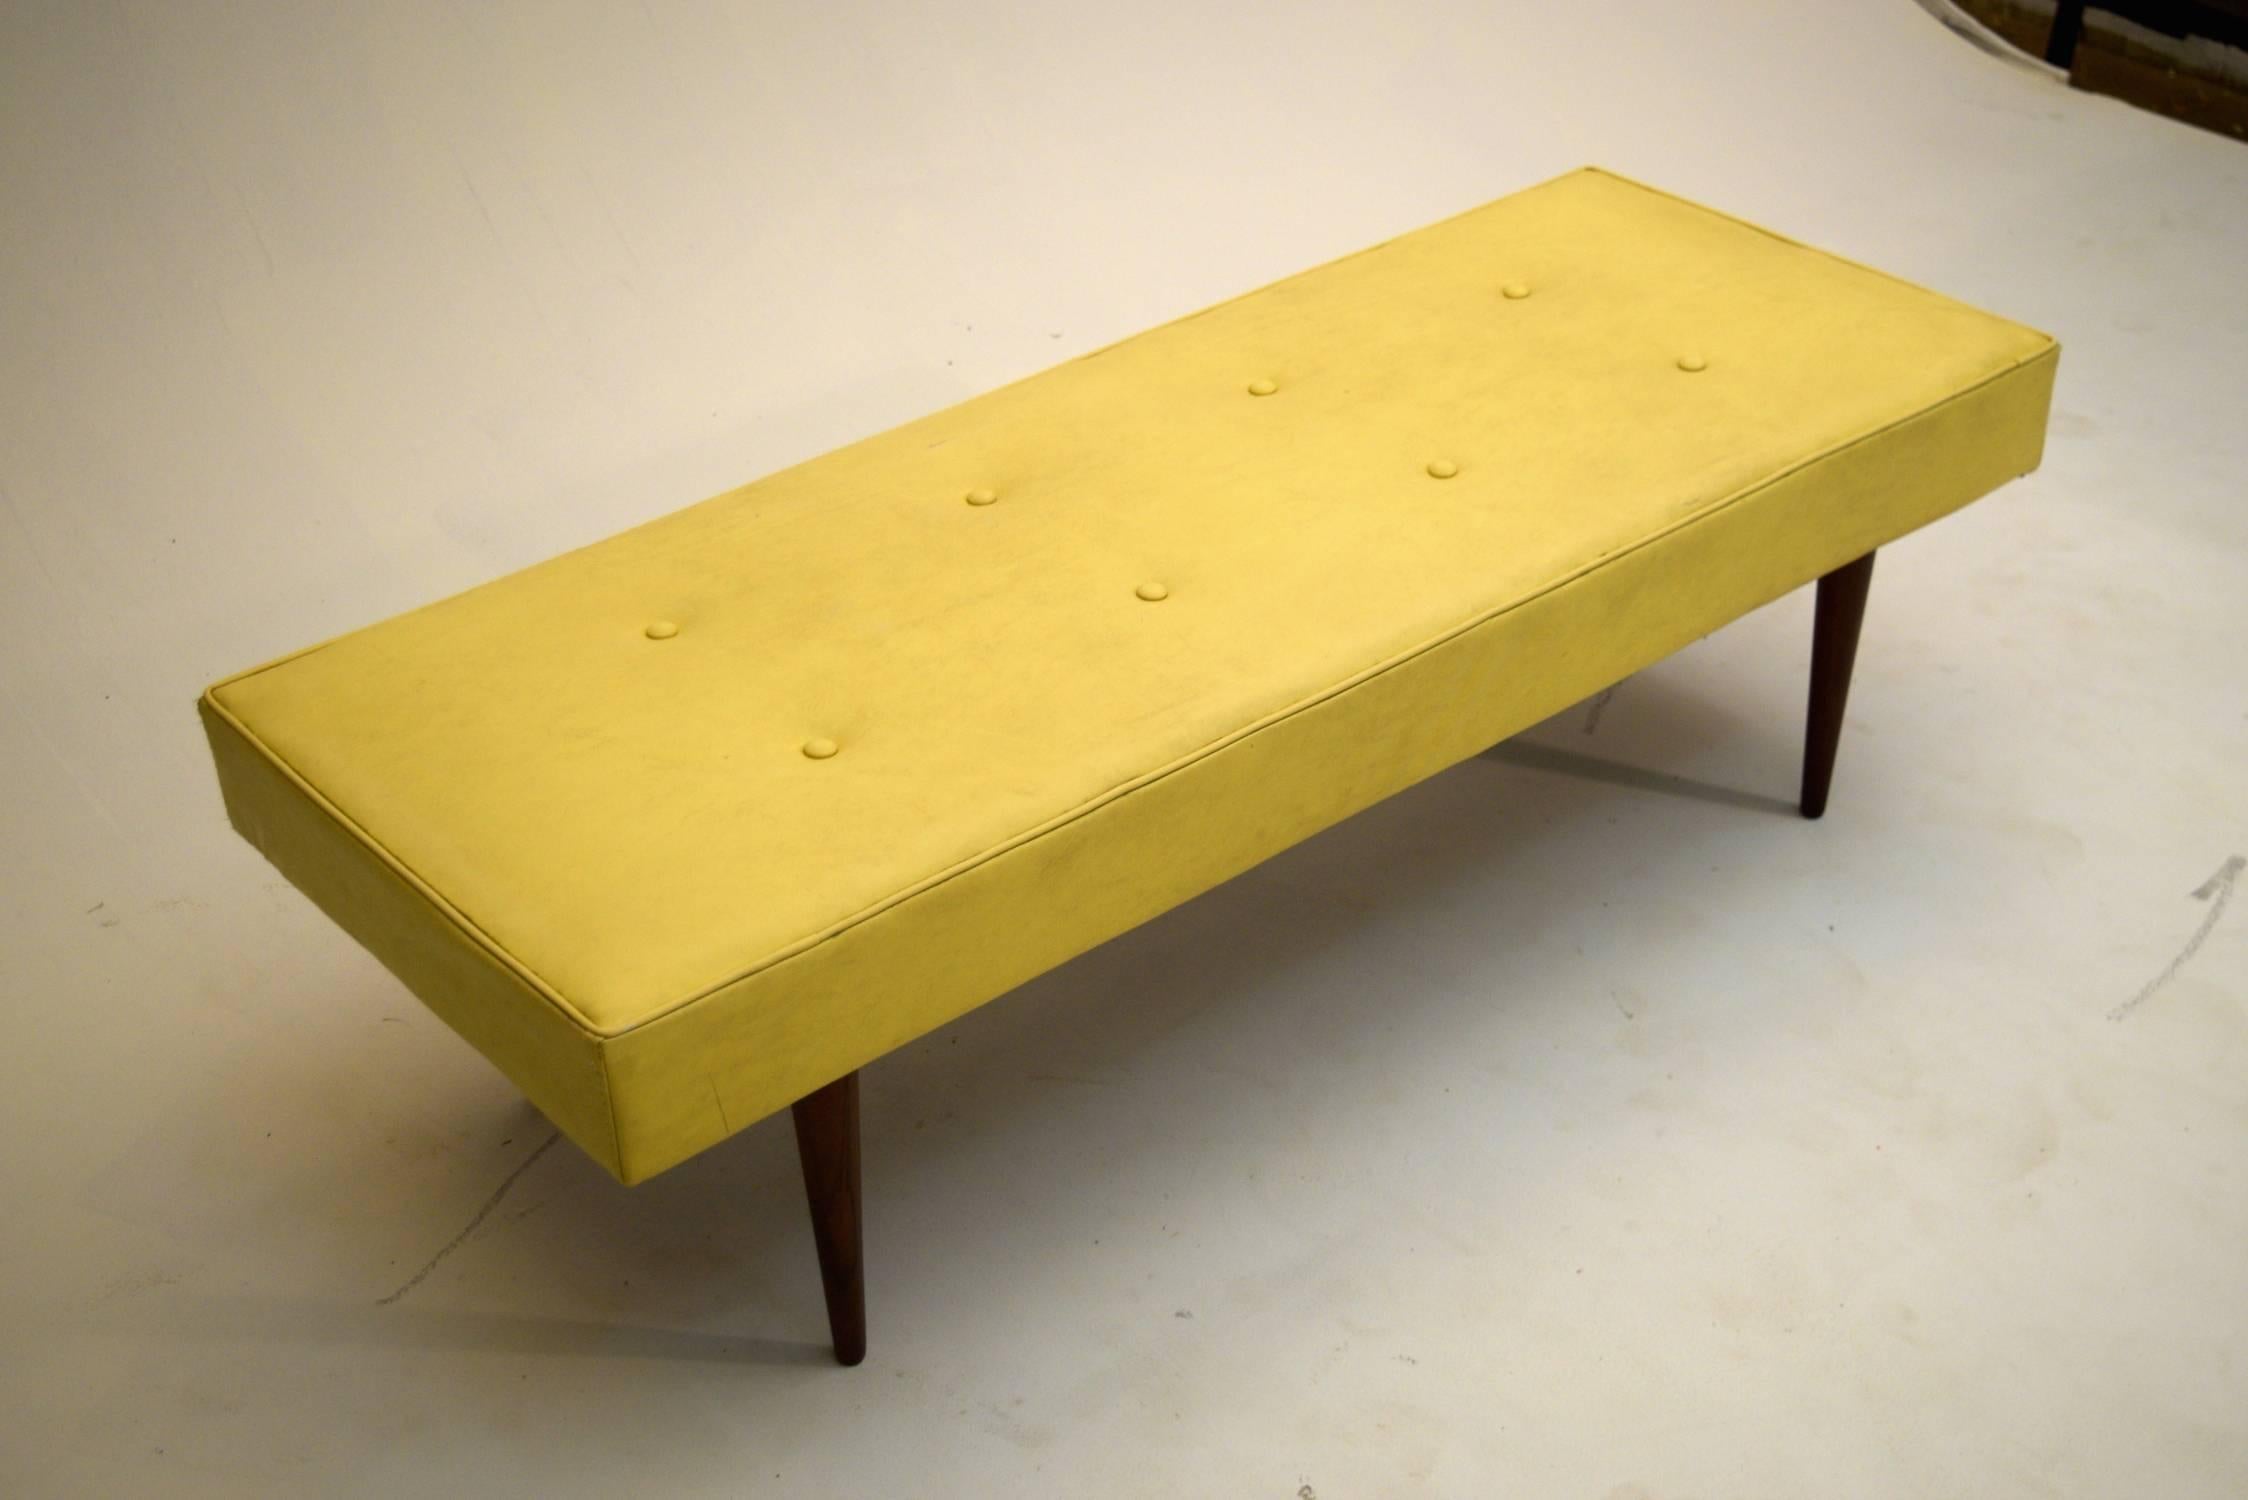 Sturdy bench produced with solid walnut legs, tufted vinyl with lasagne spring construction.  Good design with quality construction that could easily be reupholstered in any desired color and fabric, including this original sunny yellow vinyl.  